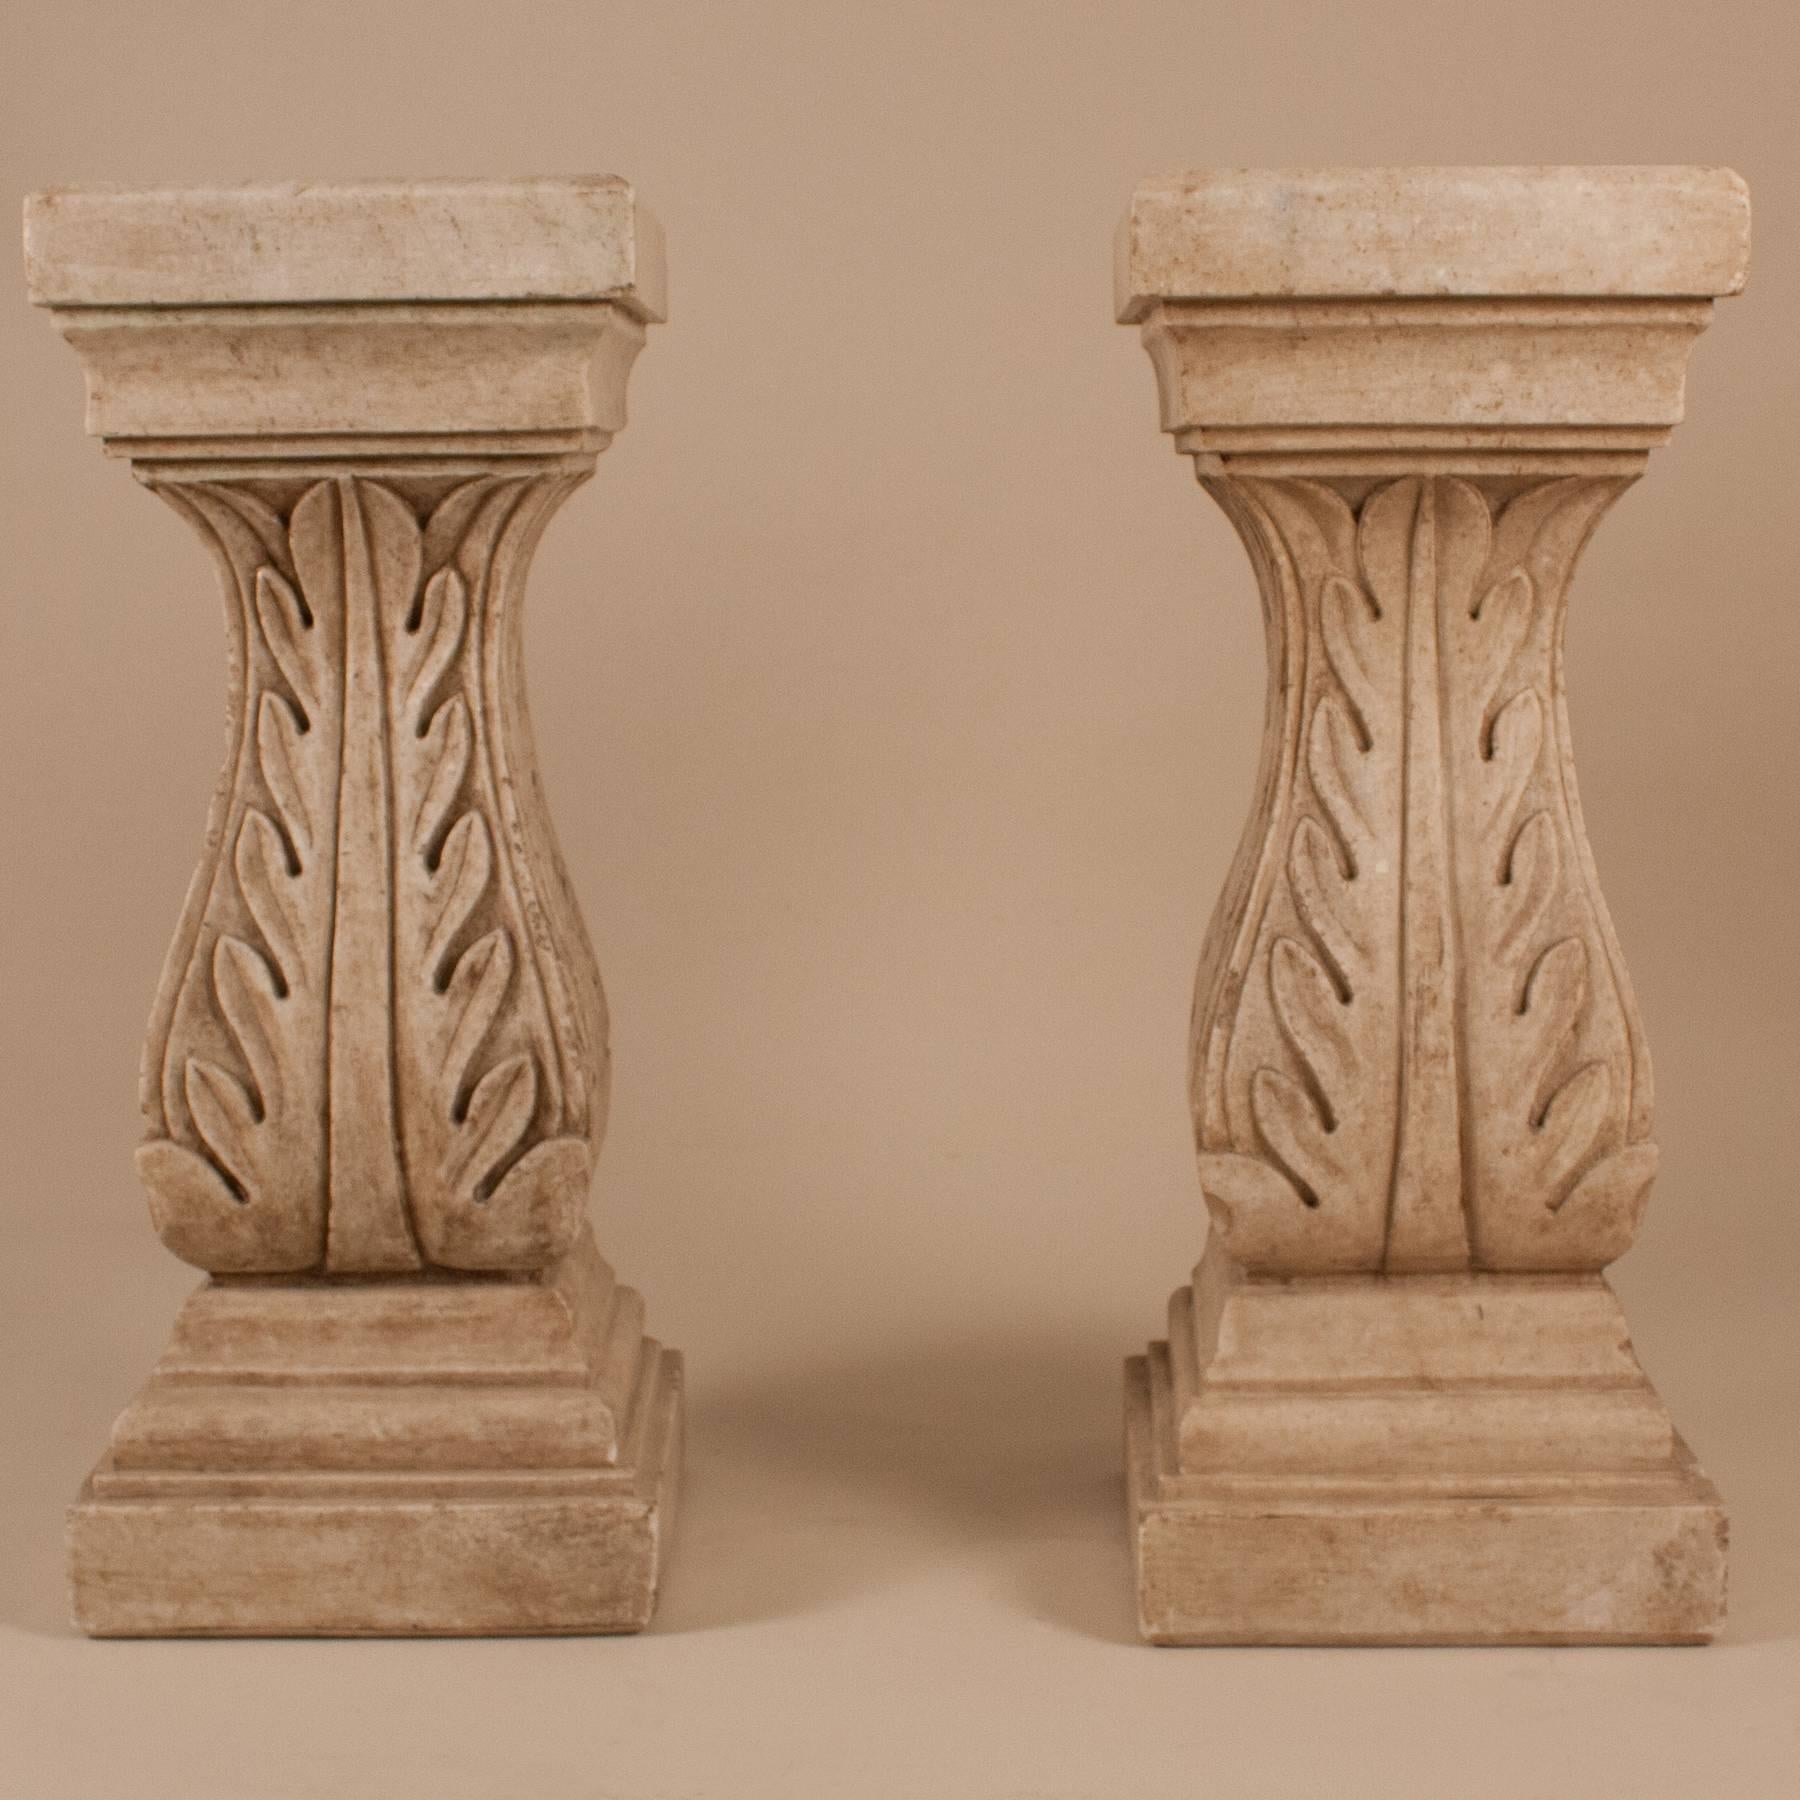 Pair of natural marble pedestals with carved acanthus leaves, circa 1950. Potential uses for these beautiful columns include as a console table base or as display stands for sculpture, etc.